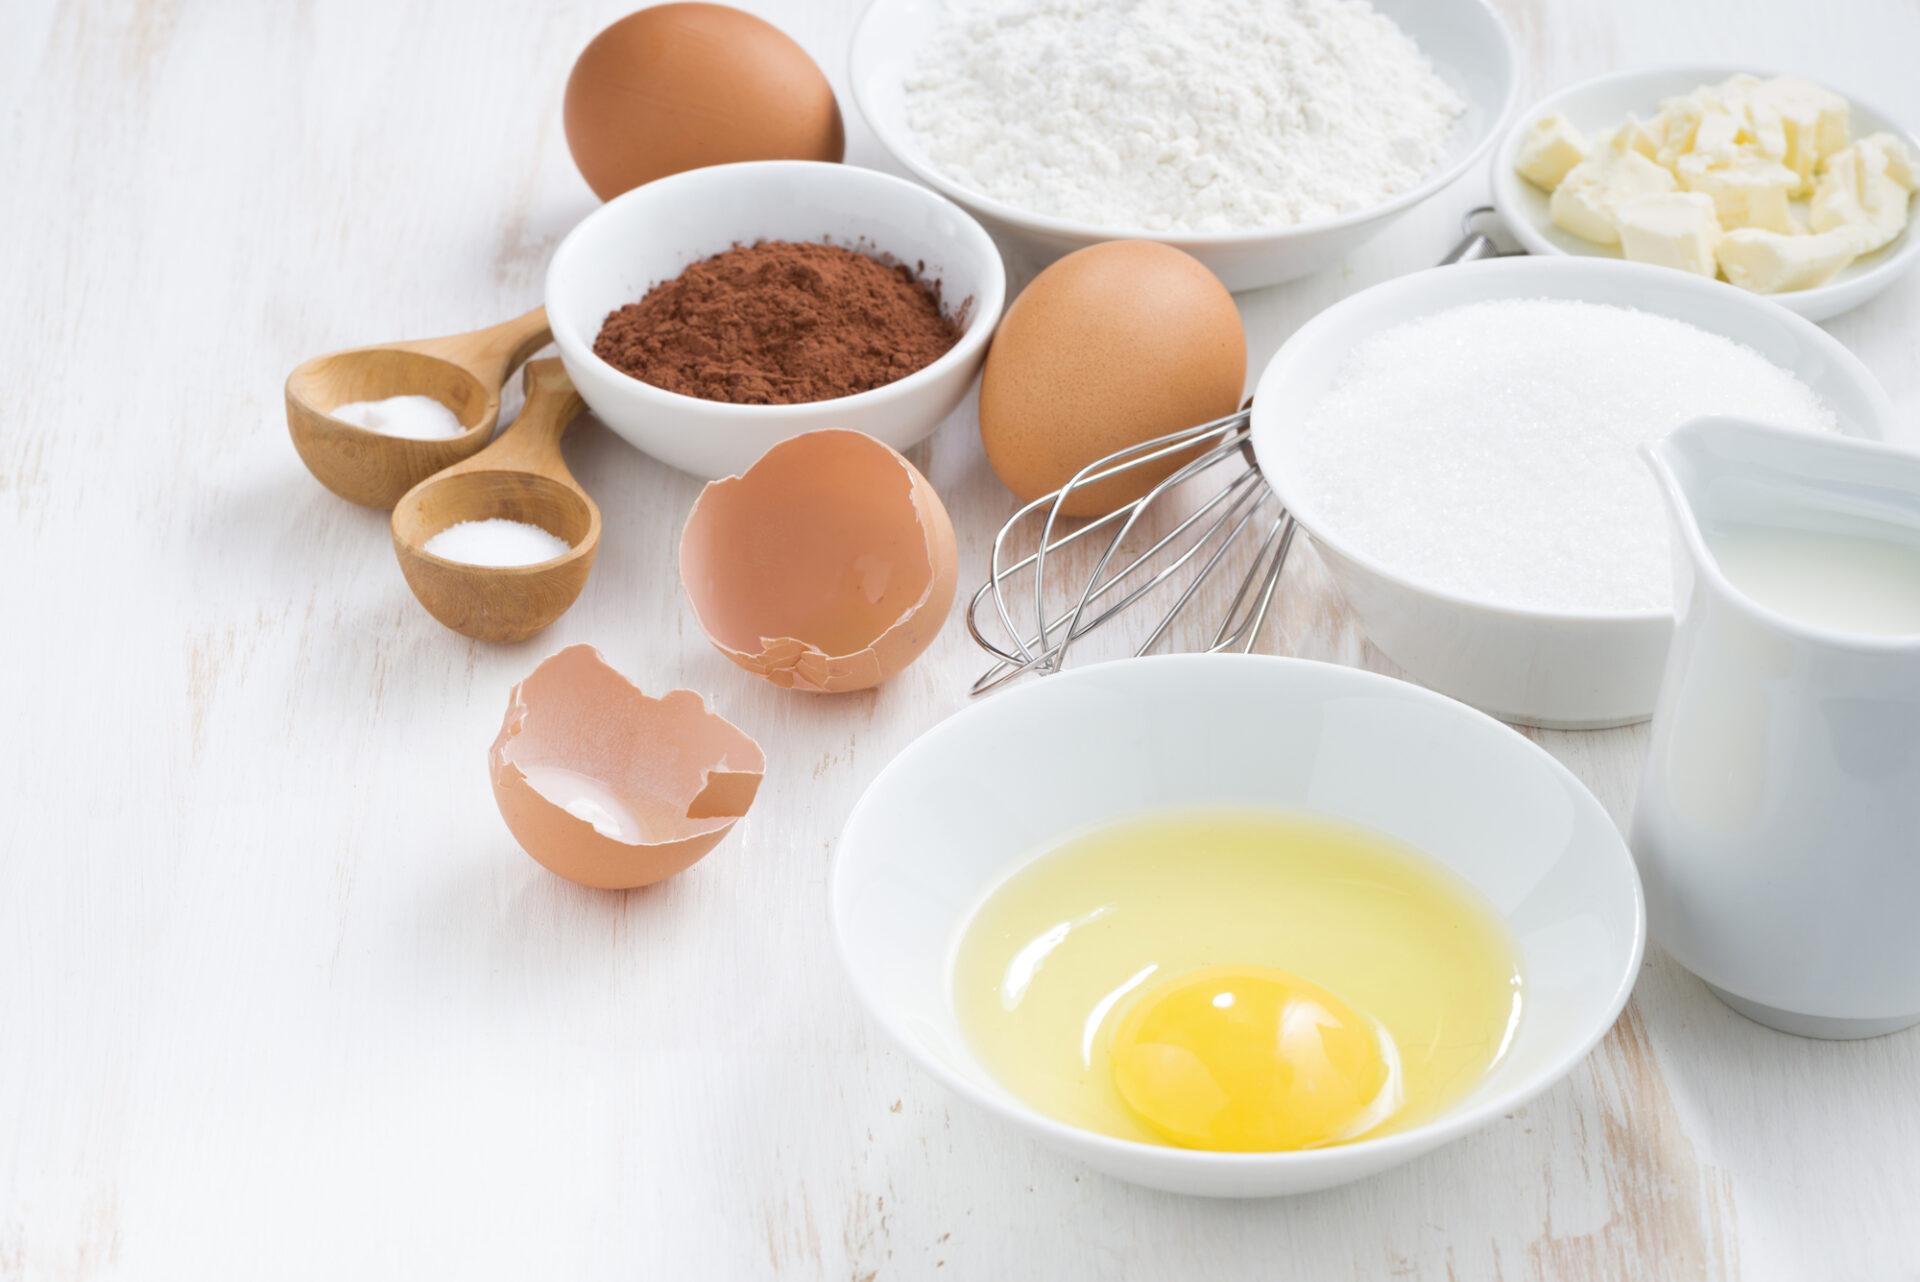 ingredients for baking on a white table